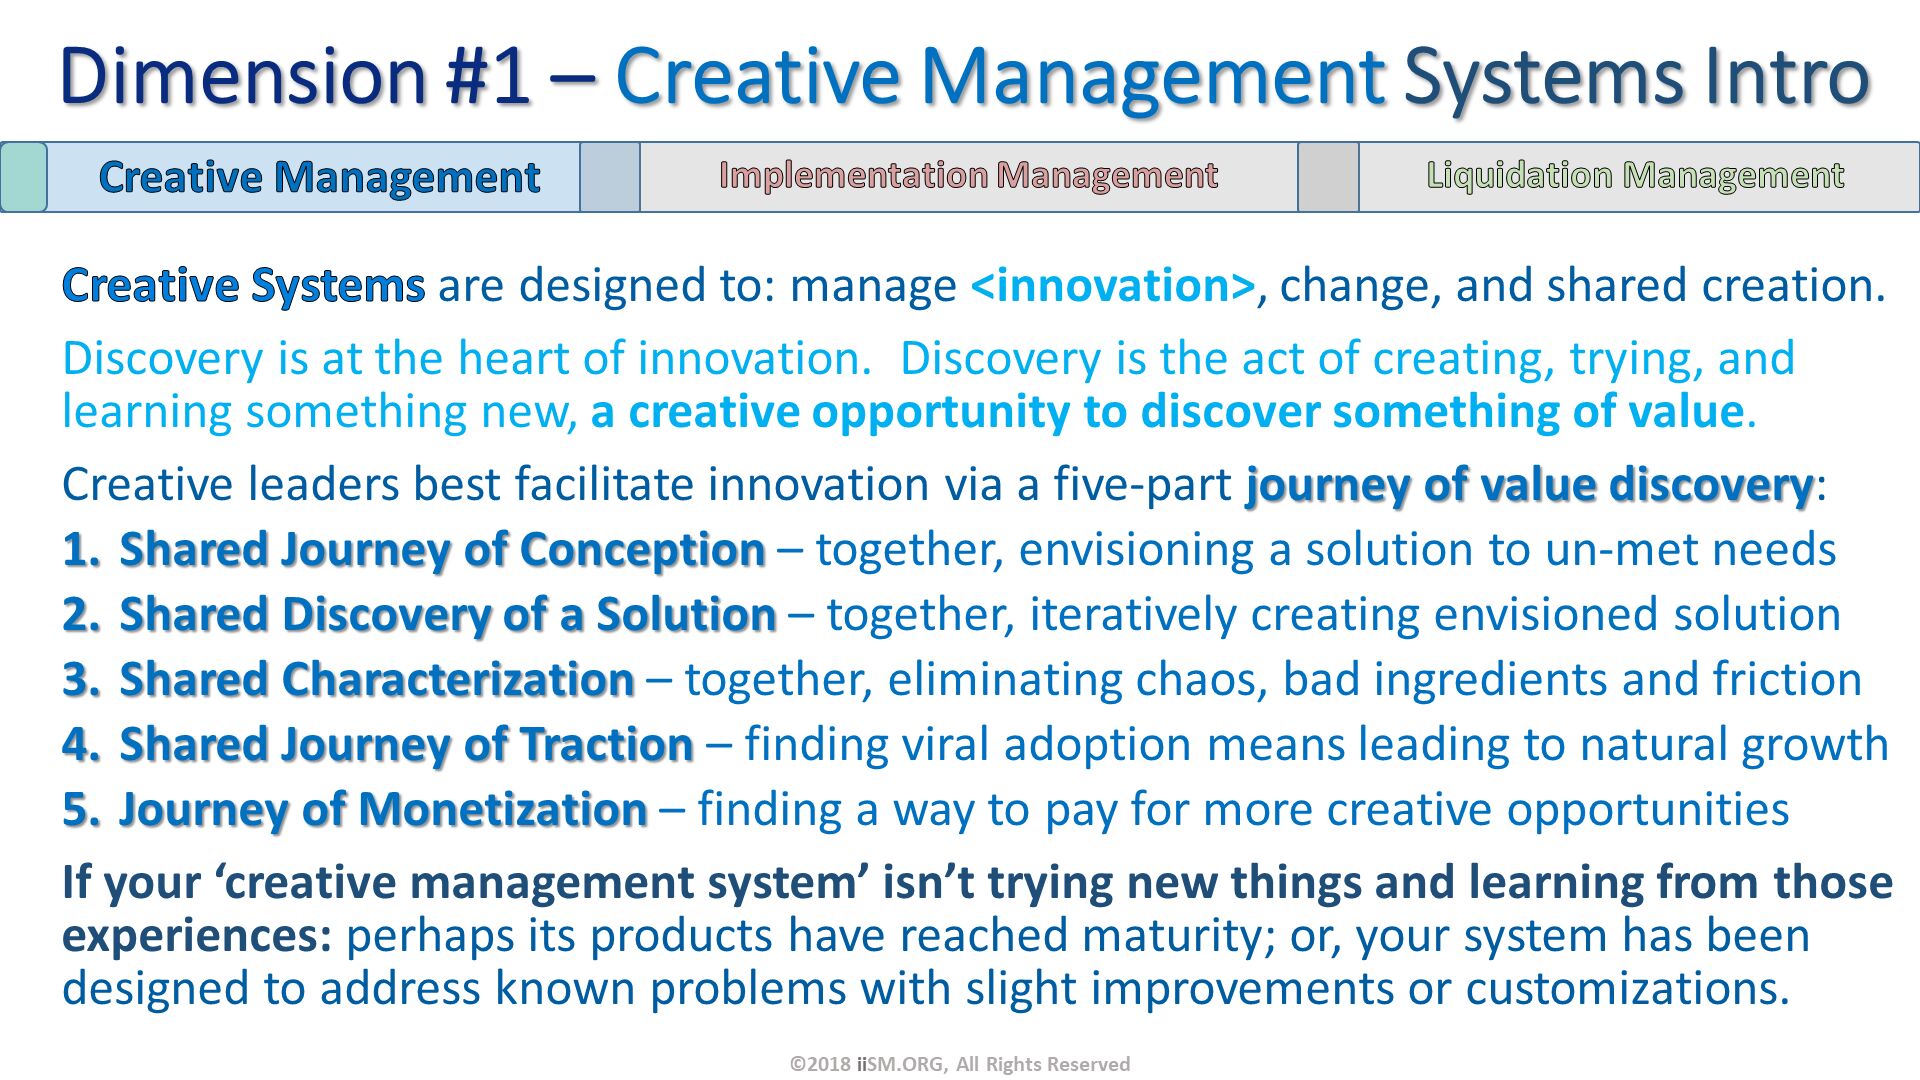 Creative Systems are designed to: manage <innovation>, change, and shared creation.  
Discovery is at the heart of innovation.  Discovery is the act of creating, trying, and learning something new, a creative opportunity to discover something of value.
Creative leaders best facilitate innovation via a five-part journey of value discovery:
Shared Journey of Conception – together, envisioning a solution to un-met needs
Shared Discovery of a Solution – together, iteratively creating envisioned solution
Shared Characterization – together, eliminating chaos, bad ingredients and friction
Shared Journey of Traction – finding viral adoption means leading to natural growth
Journey of Monetization – finding a way to pay for more creative opportunities
If your ‘creative management system’ isn’t trying new things and learning from those experiences: perhaps its products have reached maturity; or, your system has been designed to address known problems with slight improvements or customizations. Dimension #1 – Creative Management Systems Intro. ©2018 iiSM.ORG, All Rights Reserved. 